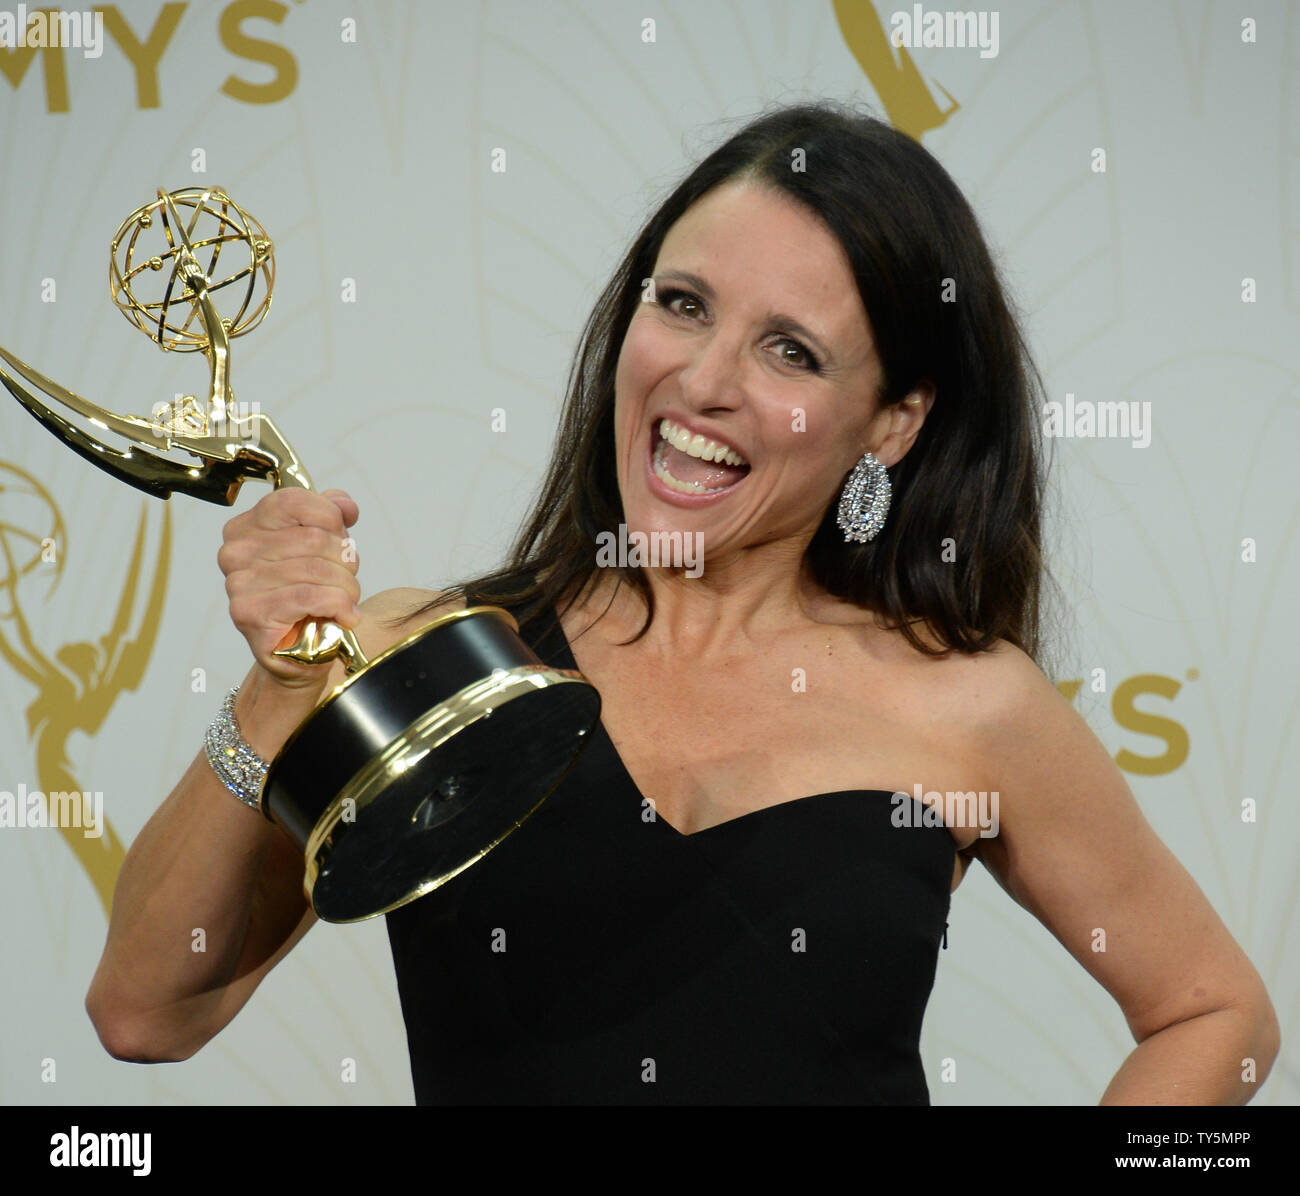 Julia Louis-Dreyfus holds her Emmy Award for outstanding lead actress in a comedy series for her portrayal of Selina Meyer on Veep at the 67th Primetime Emmy Awards in the Microsoft Theater in Los Angeles on September 20, 2015.   Photo by Jim Ruymen/UPI Stock Photo